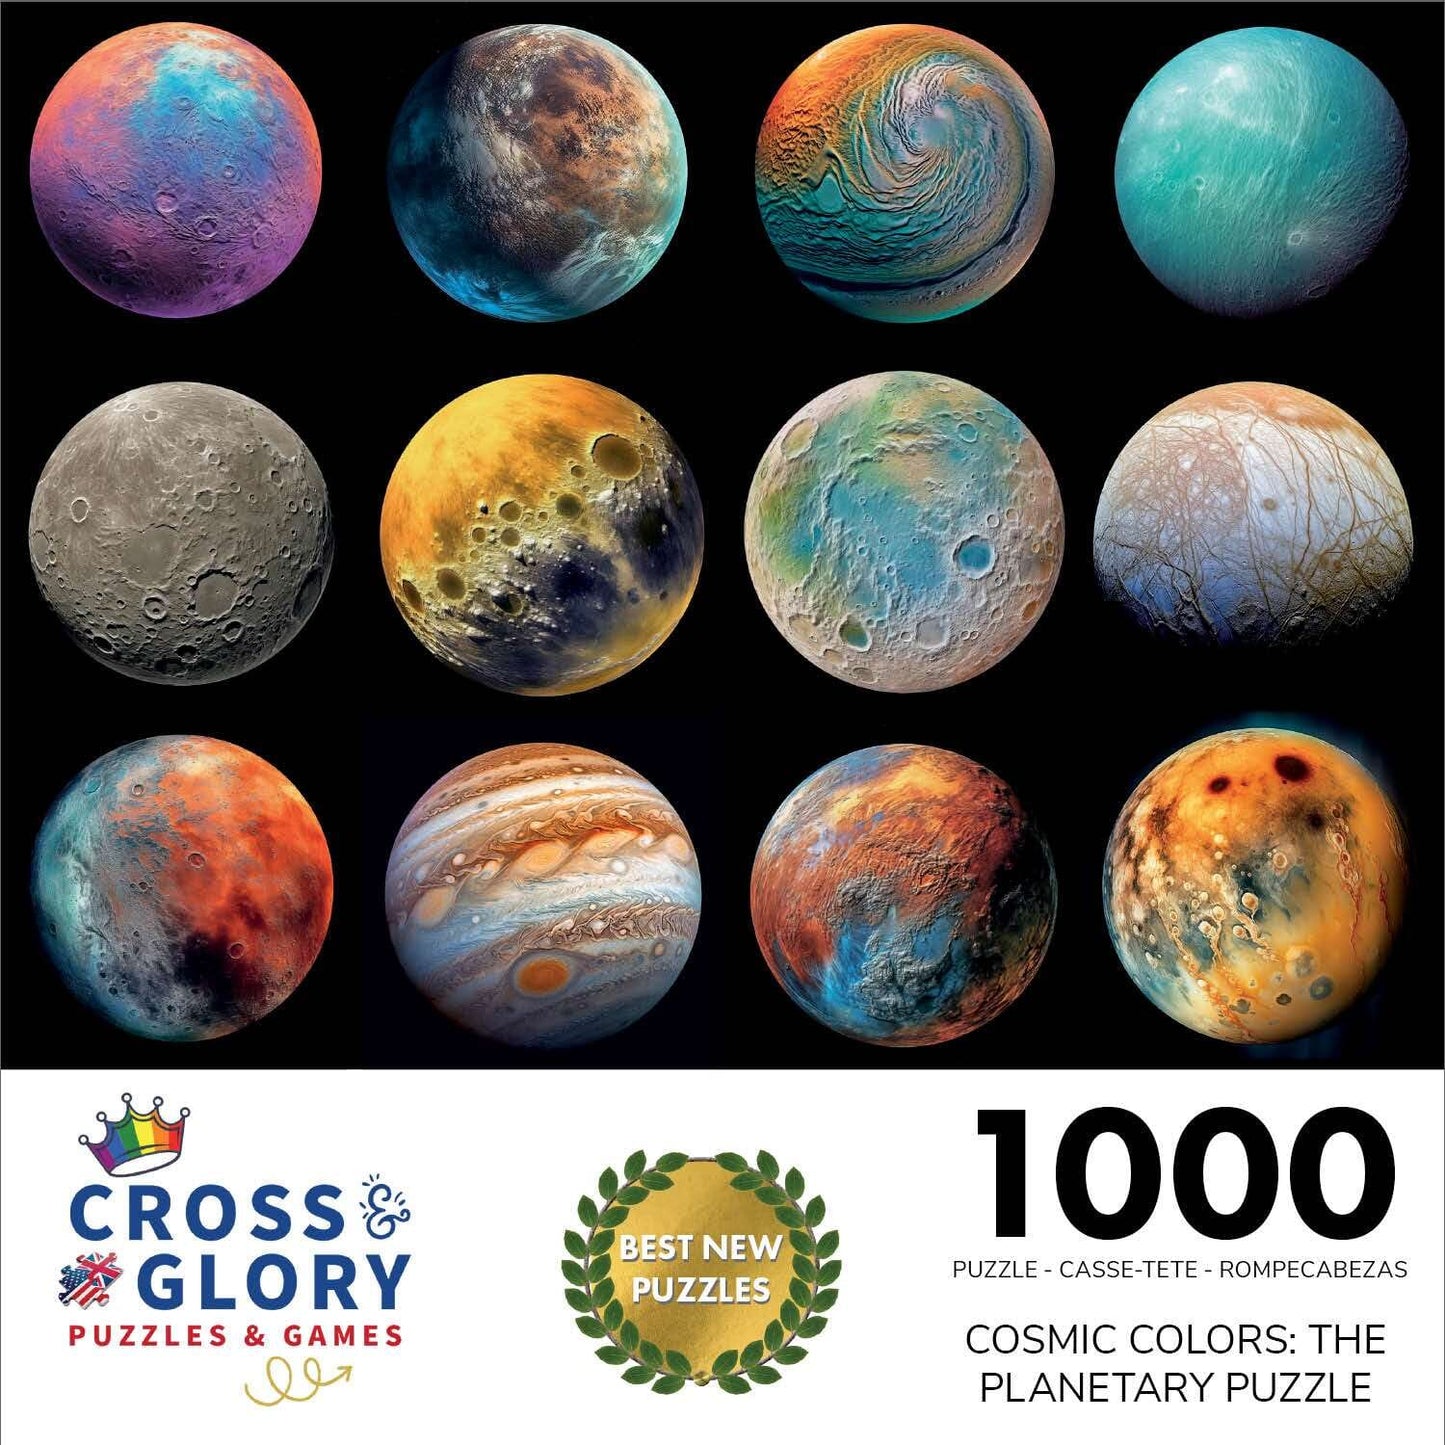 Cosmic Colors: The Planetary Puzzle - 1000 Piece Jigsaw Puzzle Jigsaw Puzzles Cross & Glory